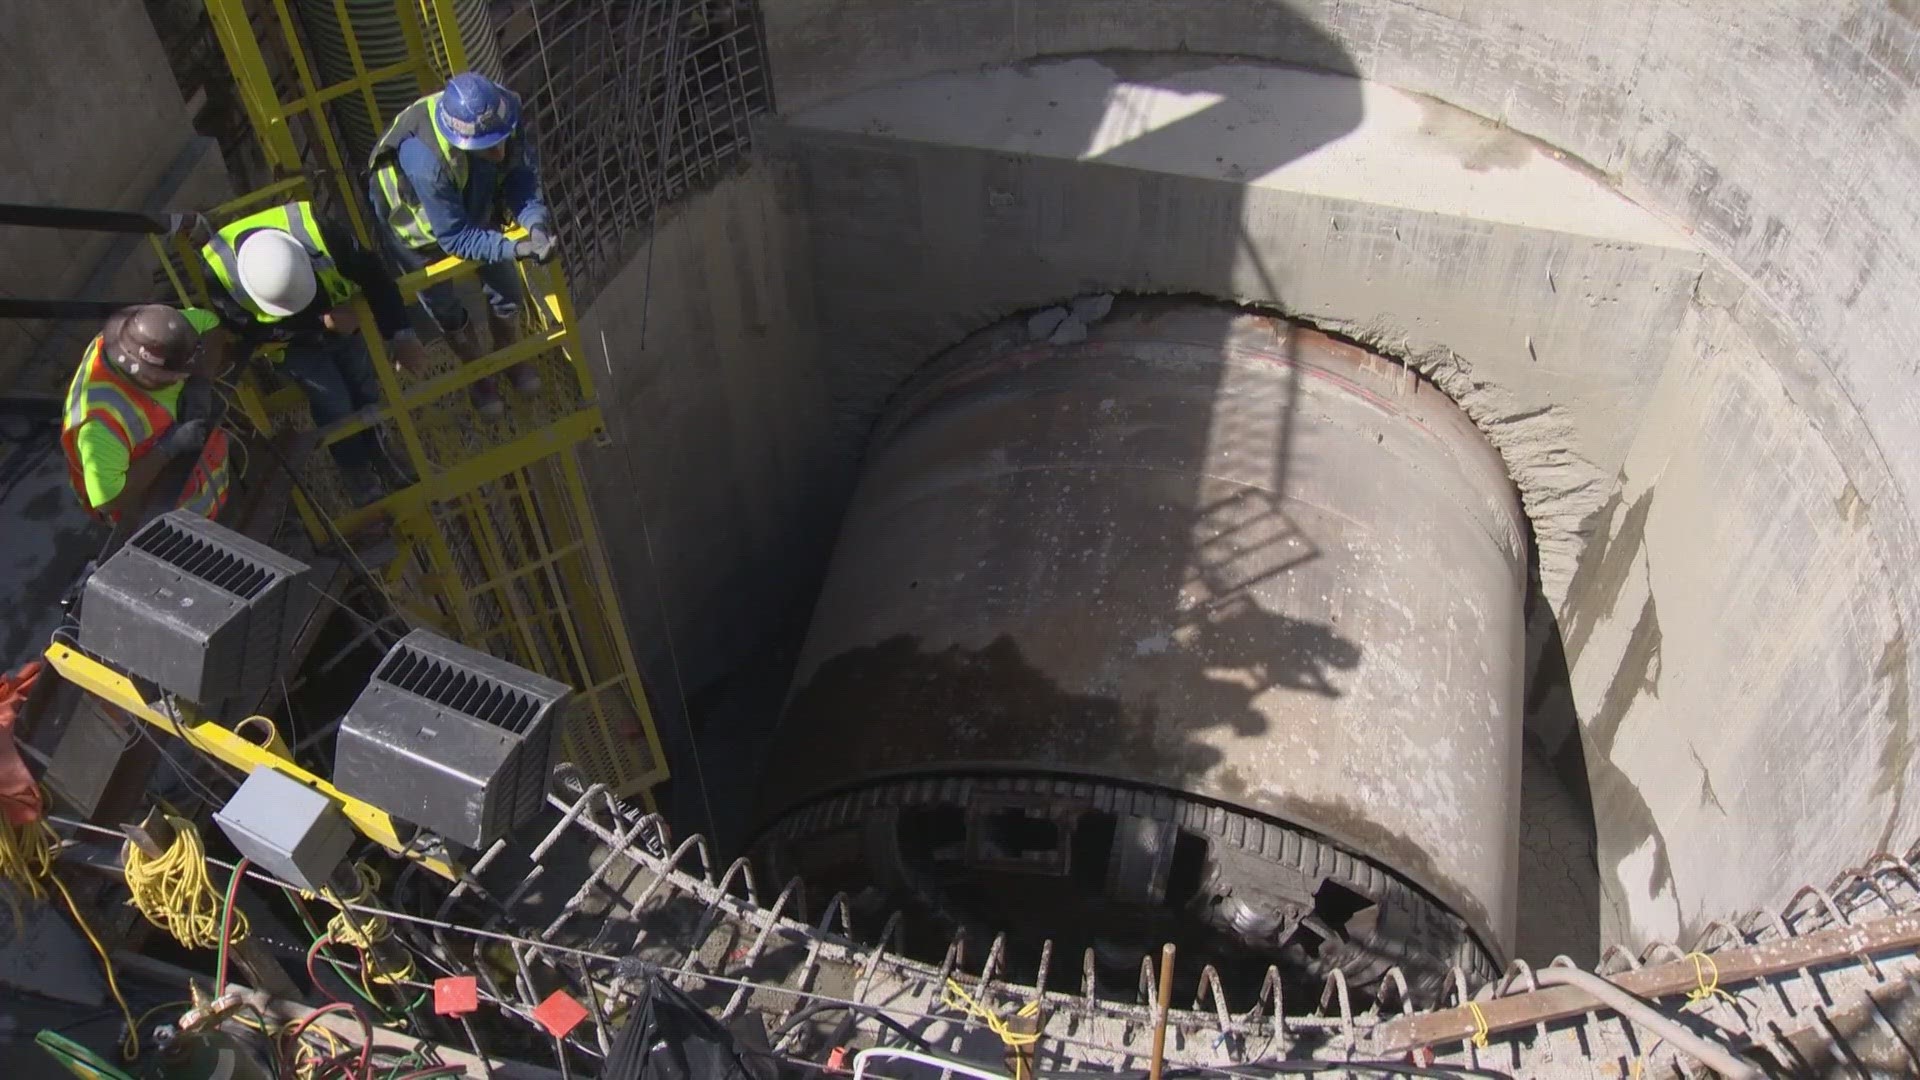 MudHoney, a tunnel boring machine, has finished its journey from Ballard to Wallingford as part of the Ship Canal Water Quality Project.